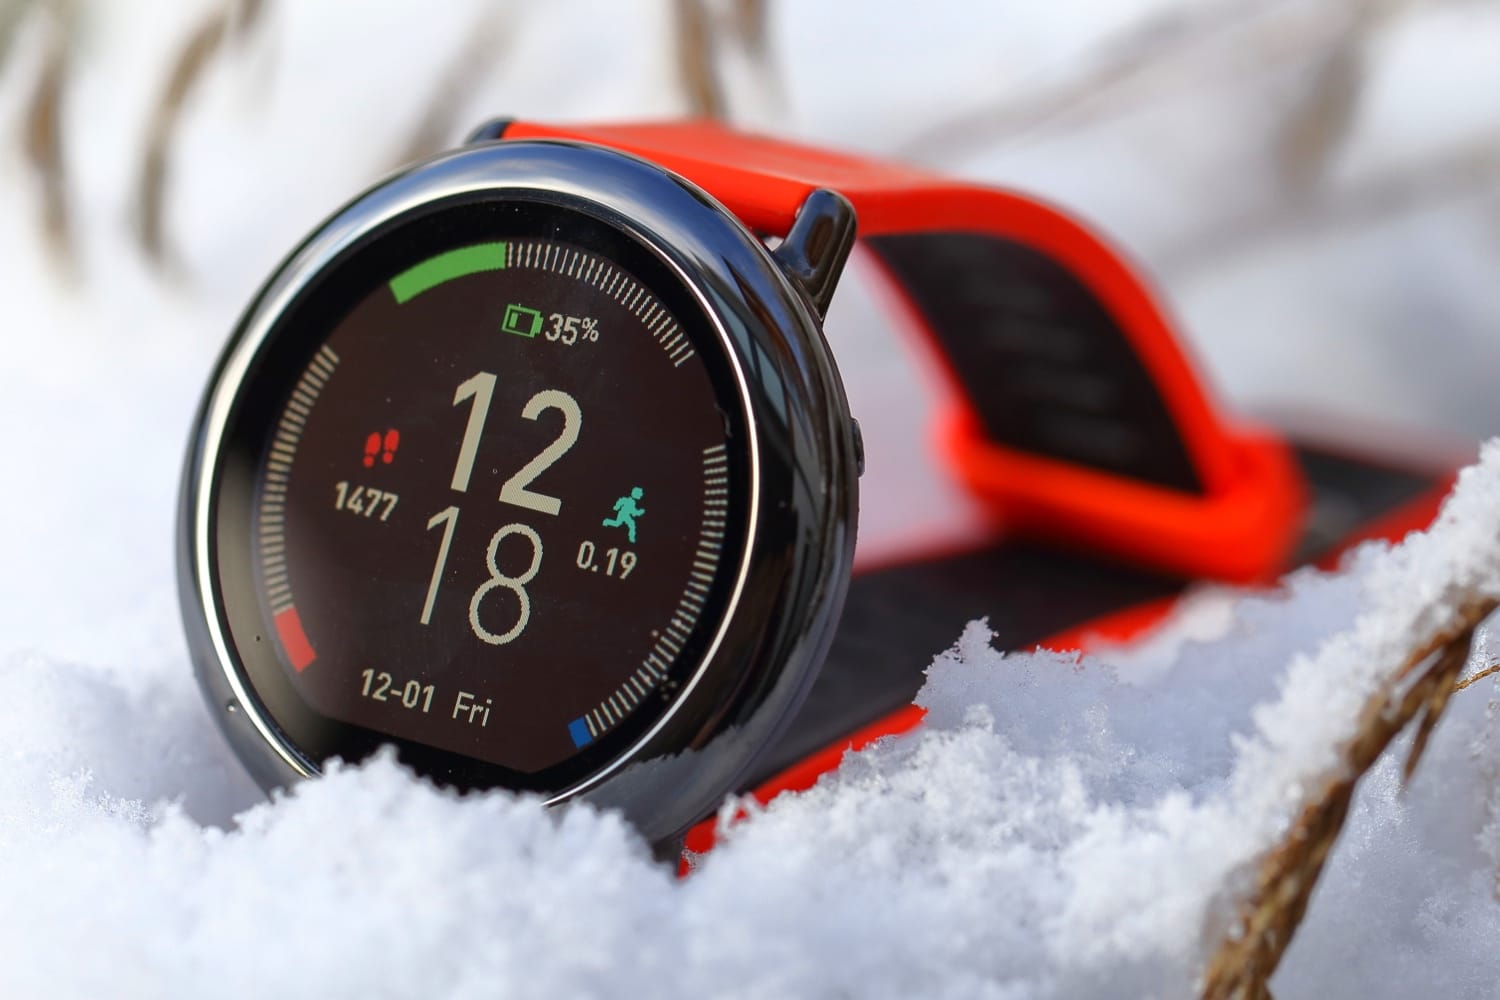 Smartwatch from Xiaomi Amazfit Pace - advantages and disadvantages